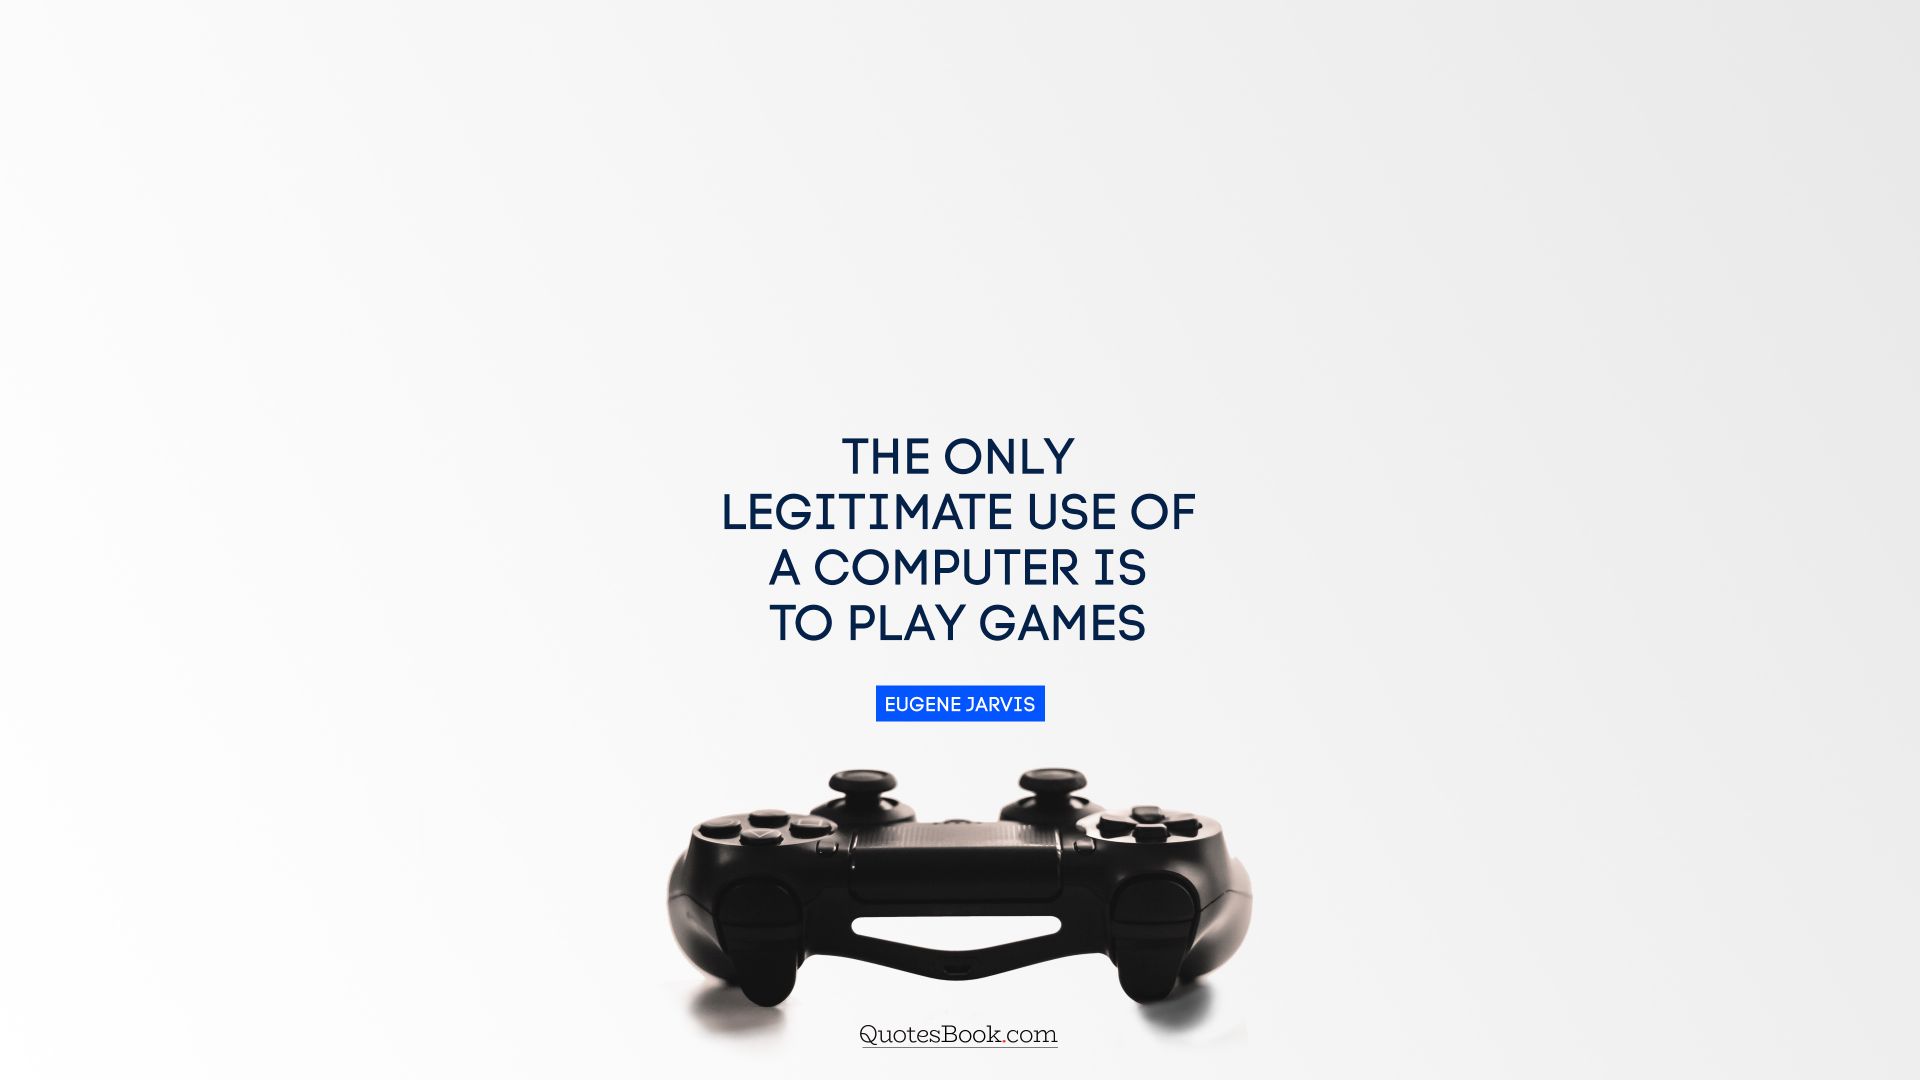 The only legitimate use of a computer is to play games. - Quote by Eugene Jarvis